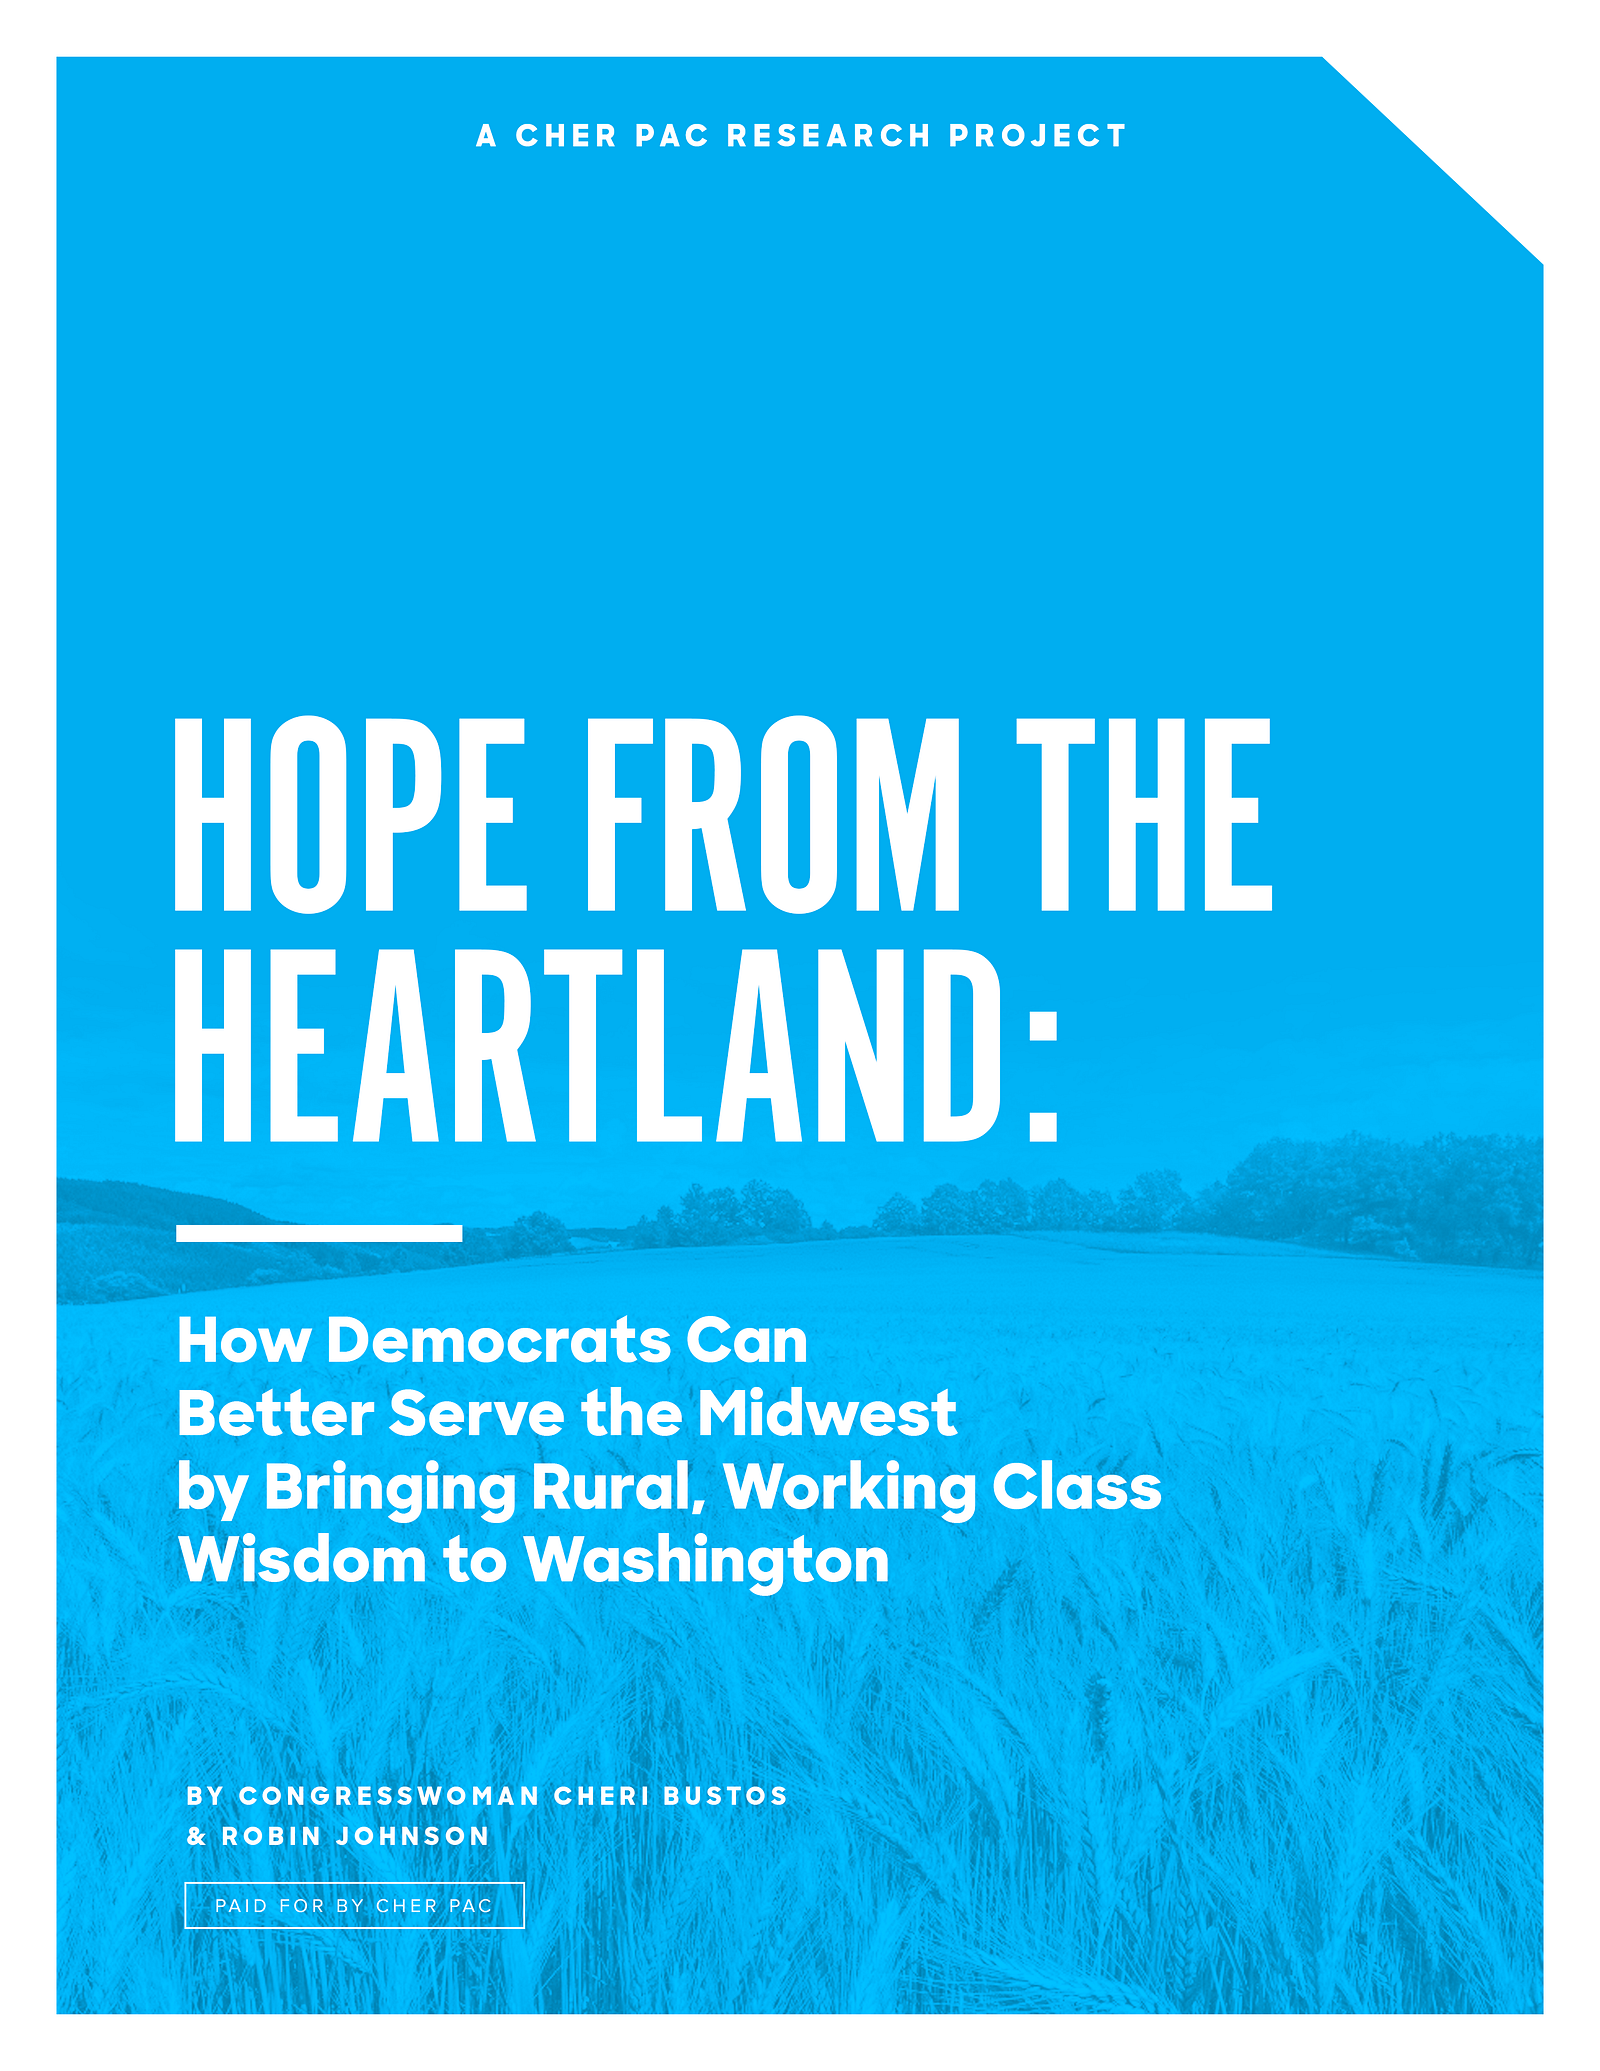 Hope From The Heartland How Democrats Can Better Serve The Midwest - hope from the heartland how democrats can better serve the midwest by bringing rural working class wisdom to washington